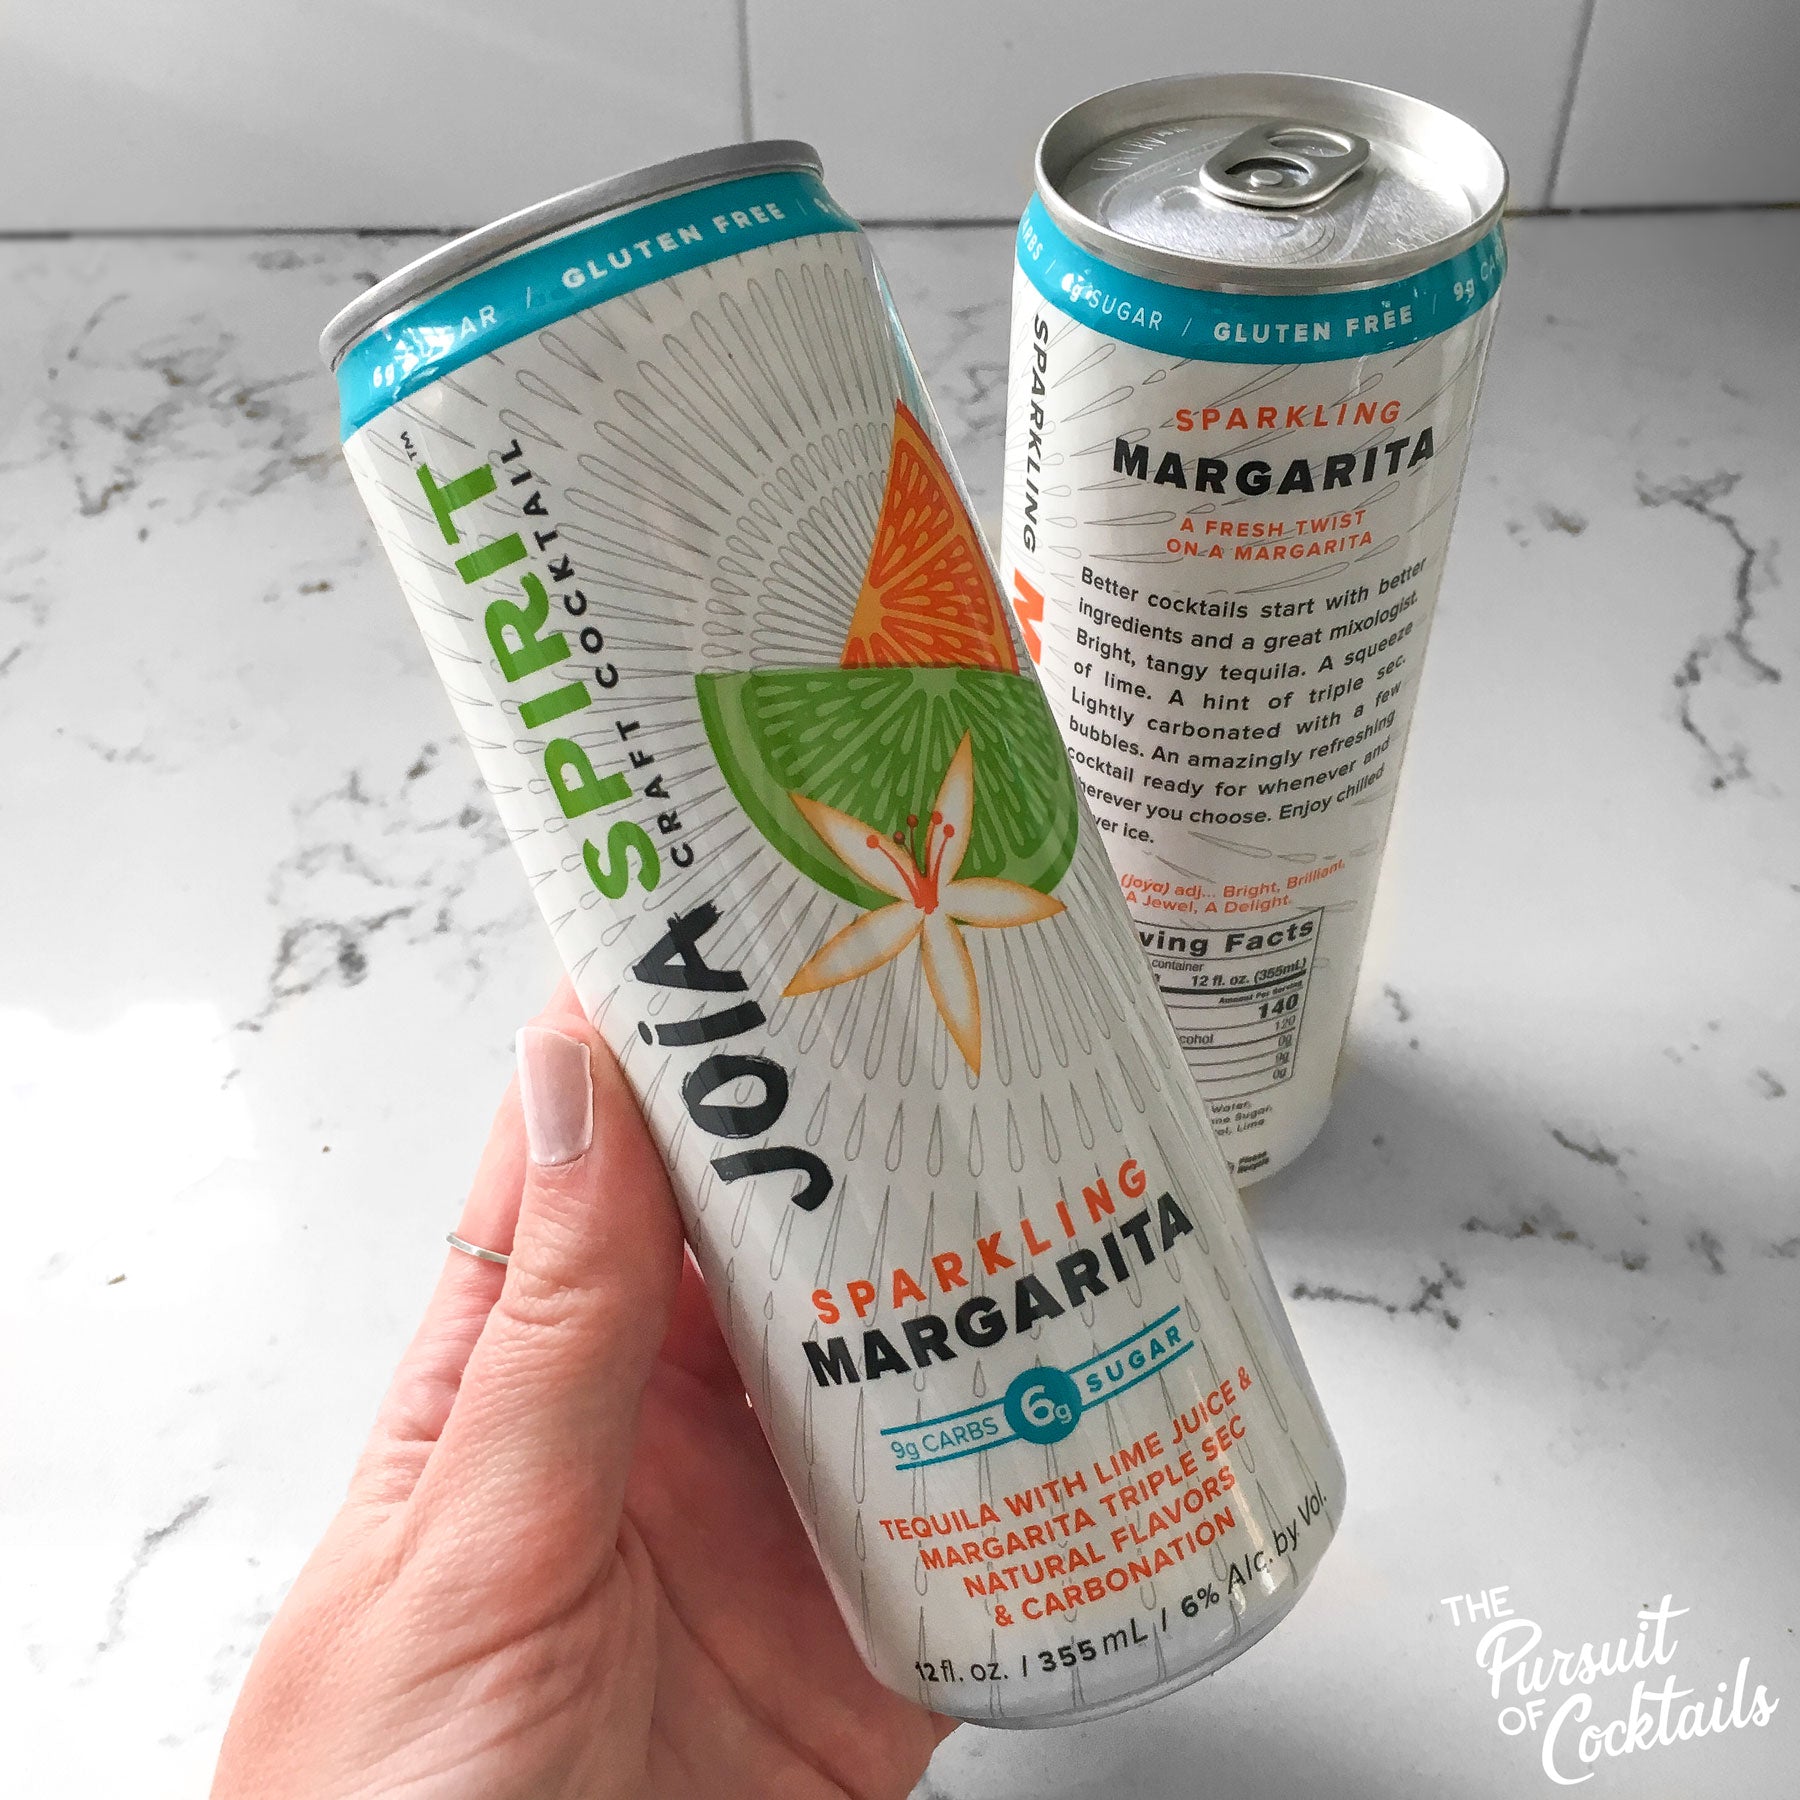 Joia Spirit sparkling margarita canned cocktail review